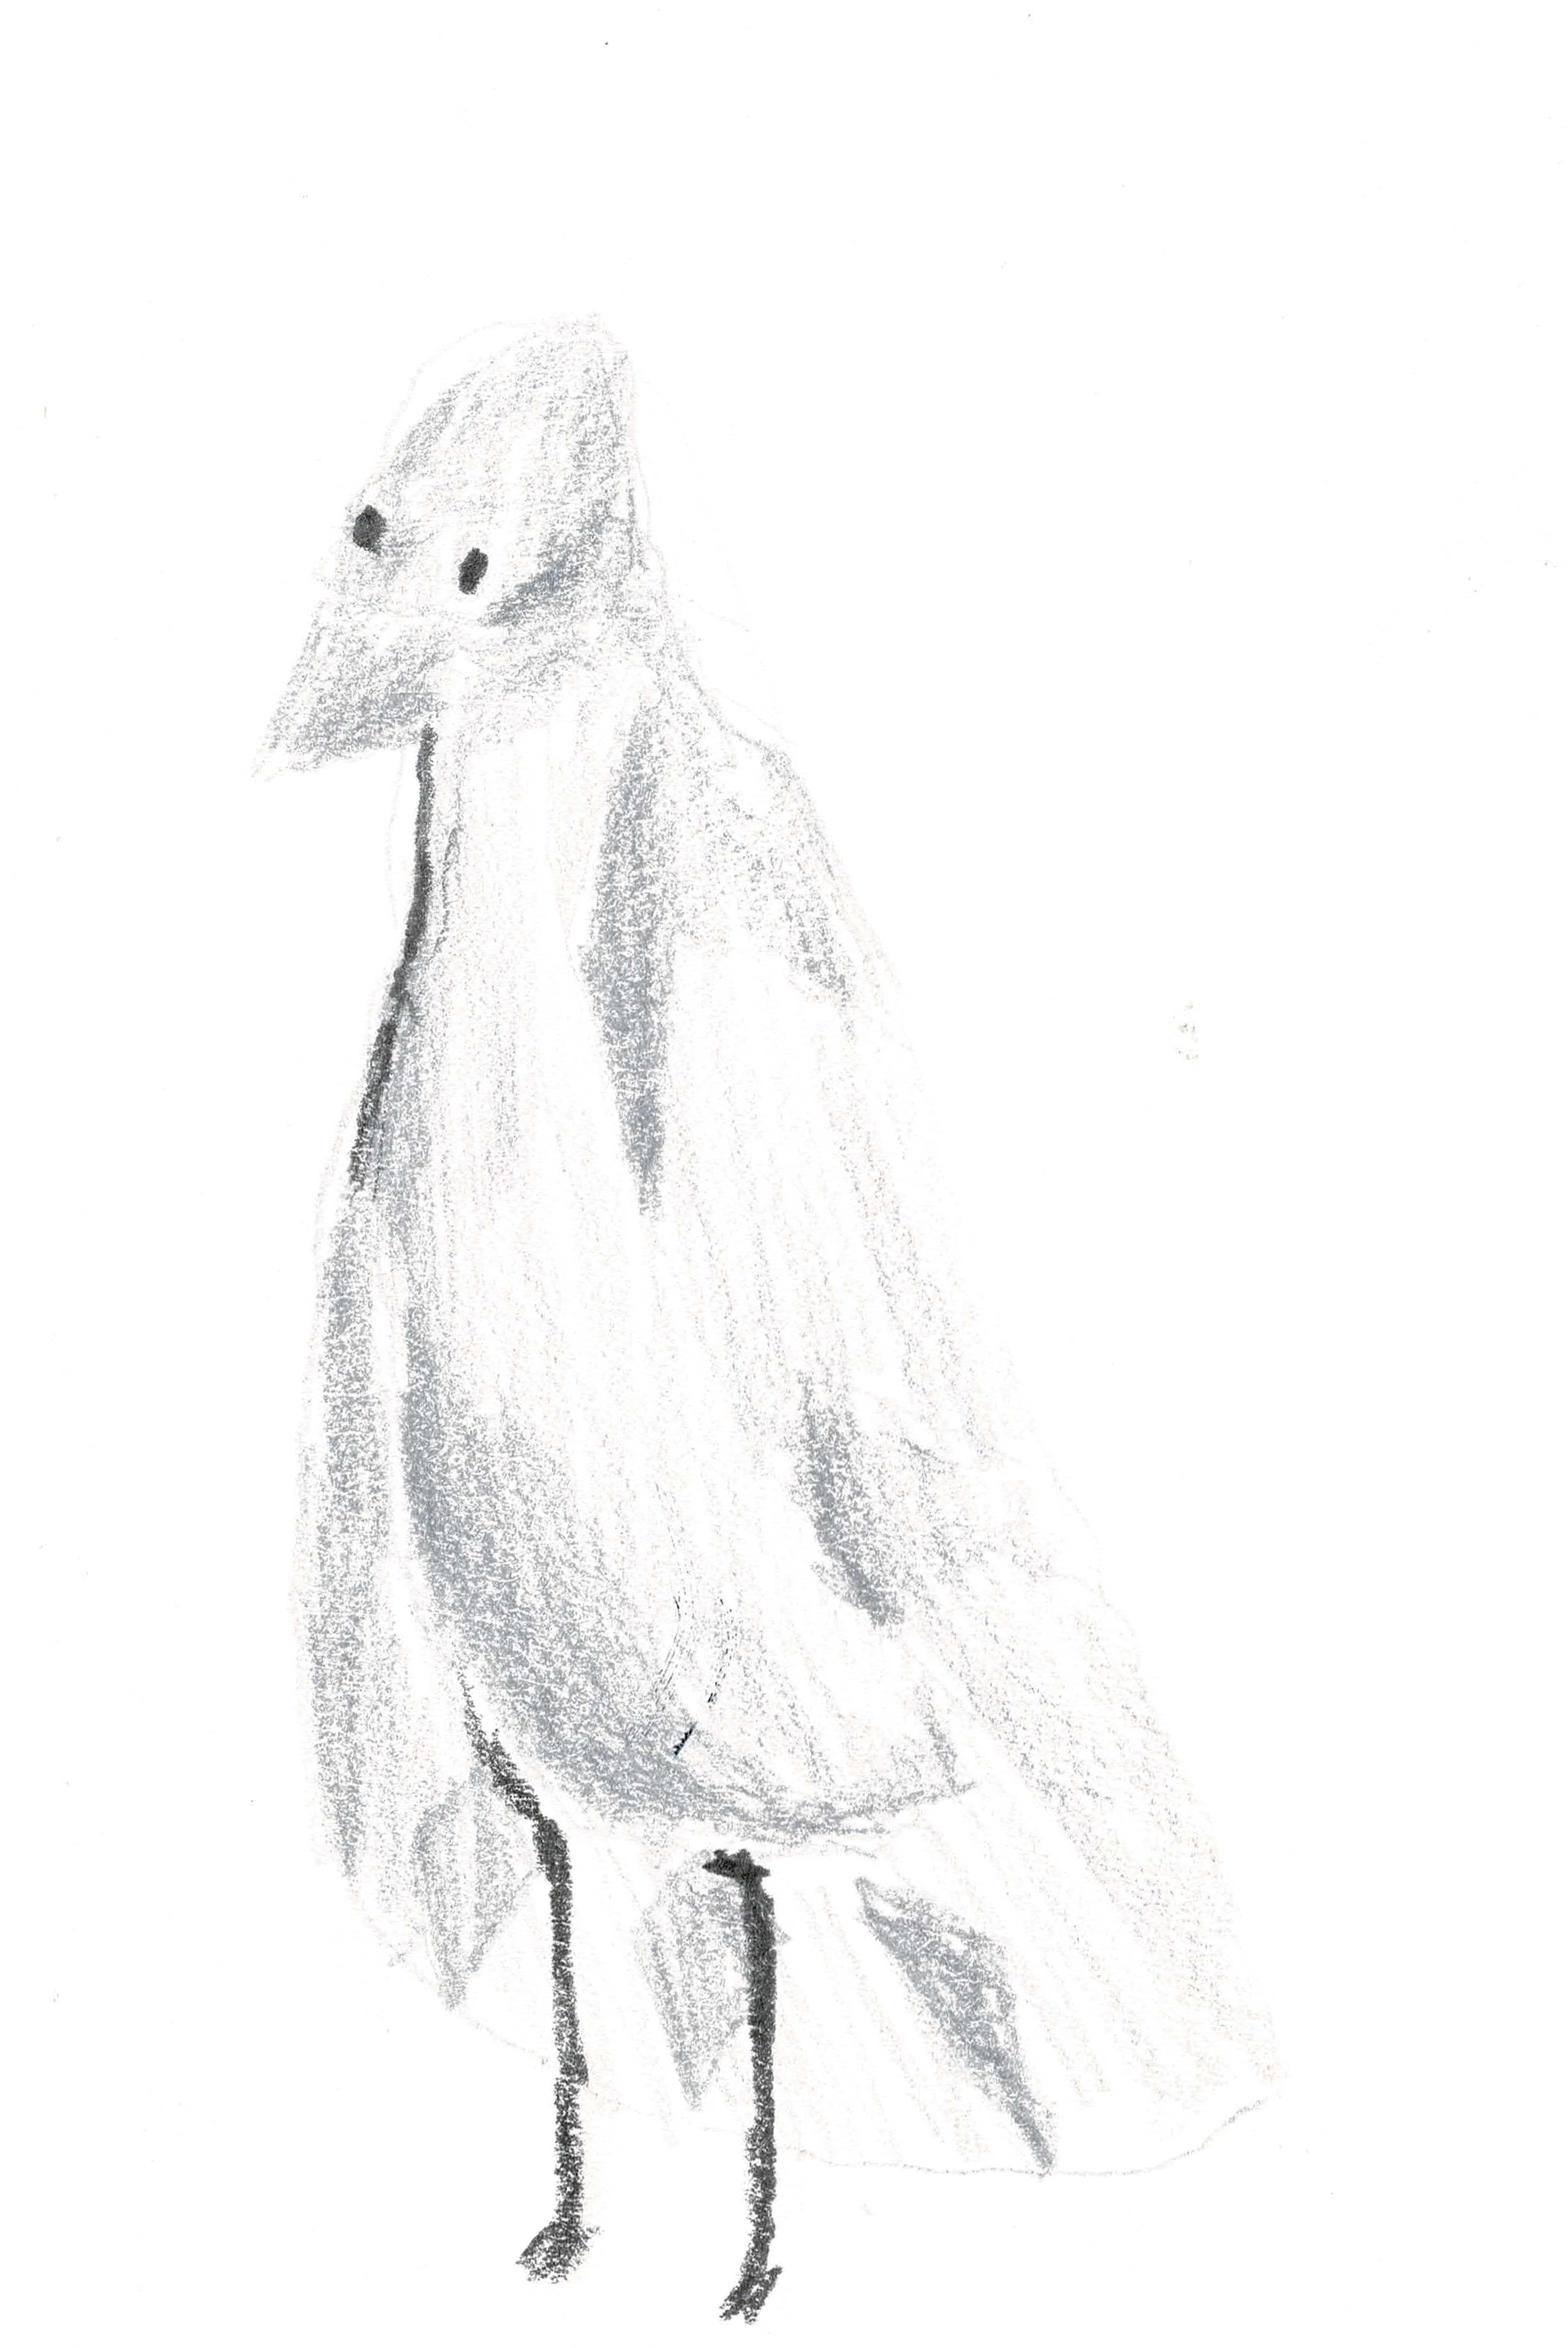 pencil drawing of a pigeon standing